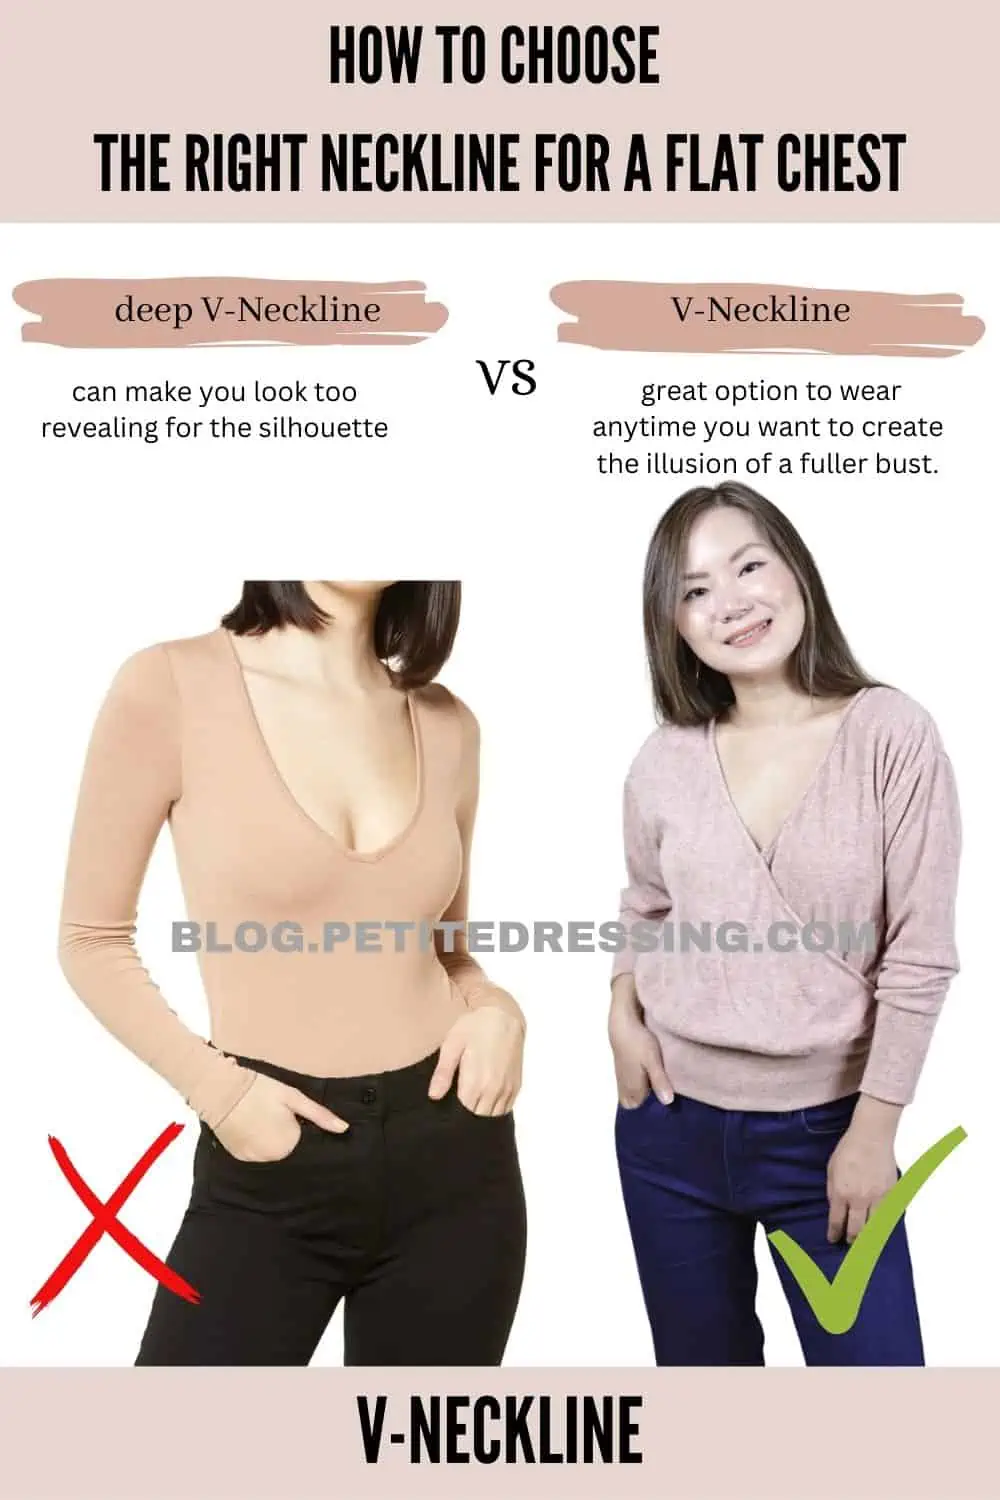 The best neckline for a small bust is a plunging/V Neckline